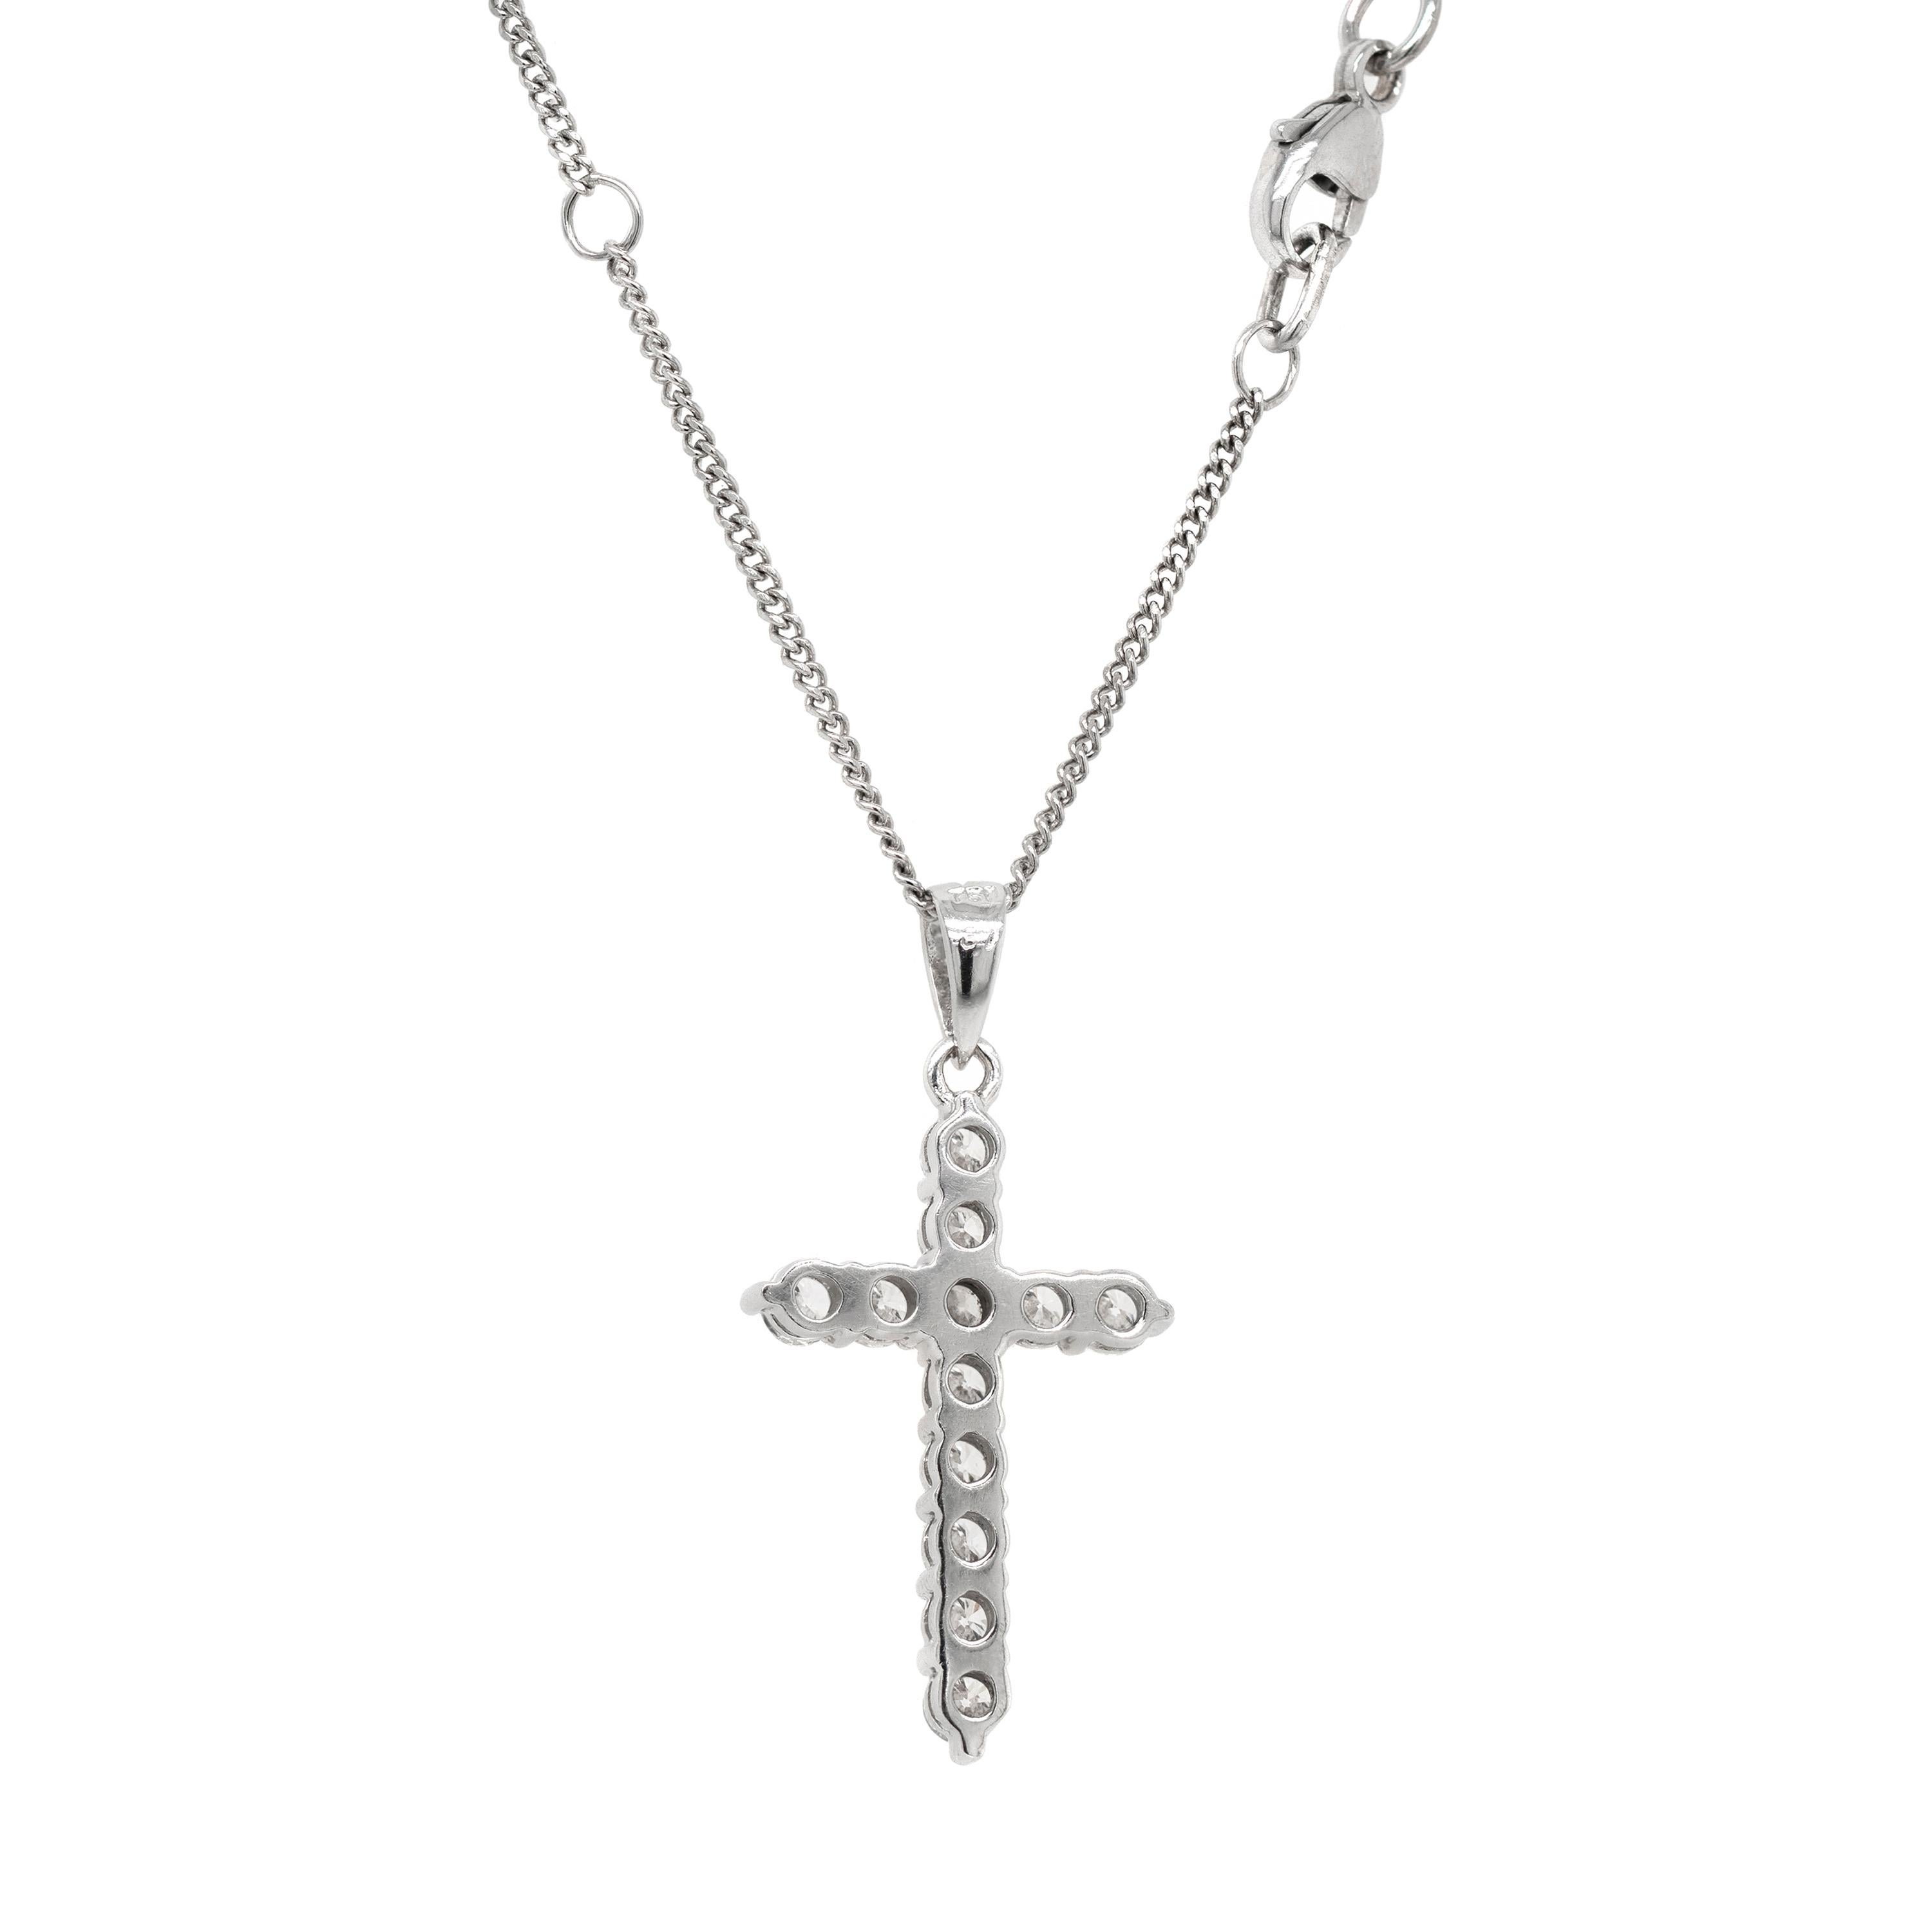 This beautiful classic cross pendant features 12 round brilliant cut diamonds with a total combined weight of 0.87ct, all mounted in claw, open back settings. The pendant hangs from a fine 18 carat white gold 16